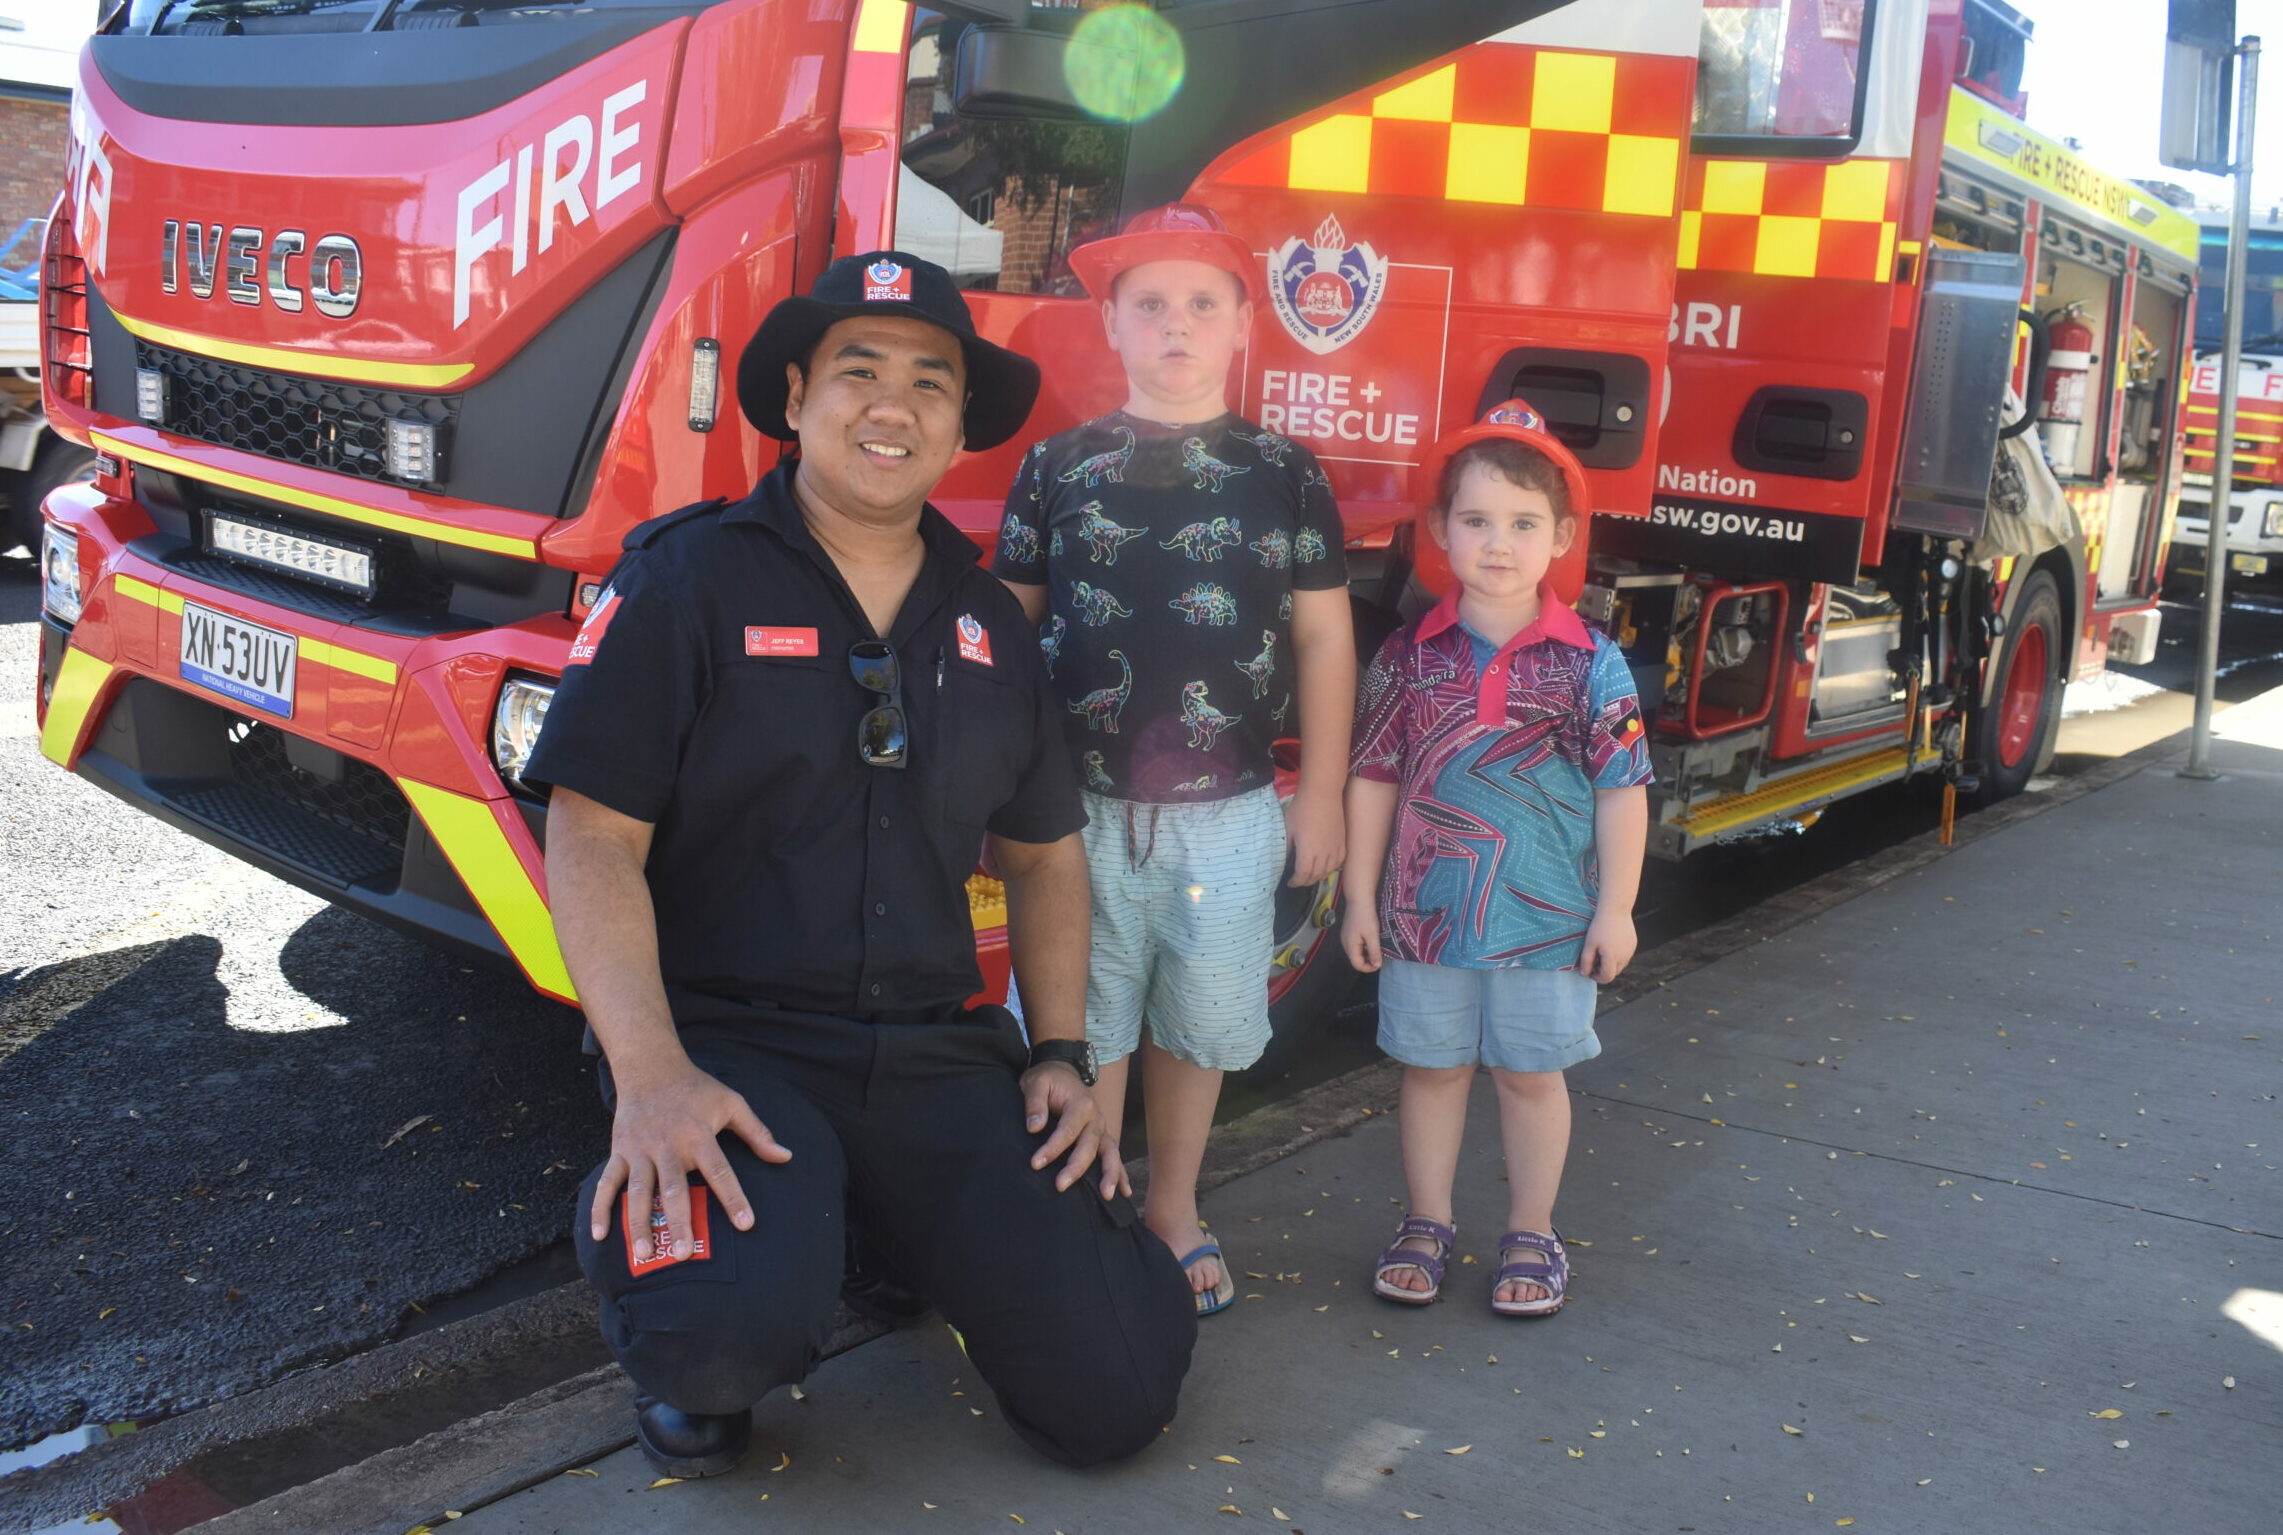 Lots of fun at Narrabri fire station open day